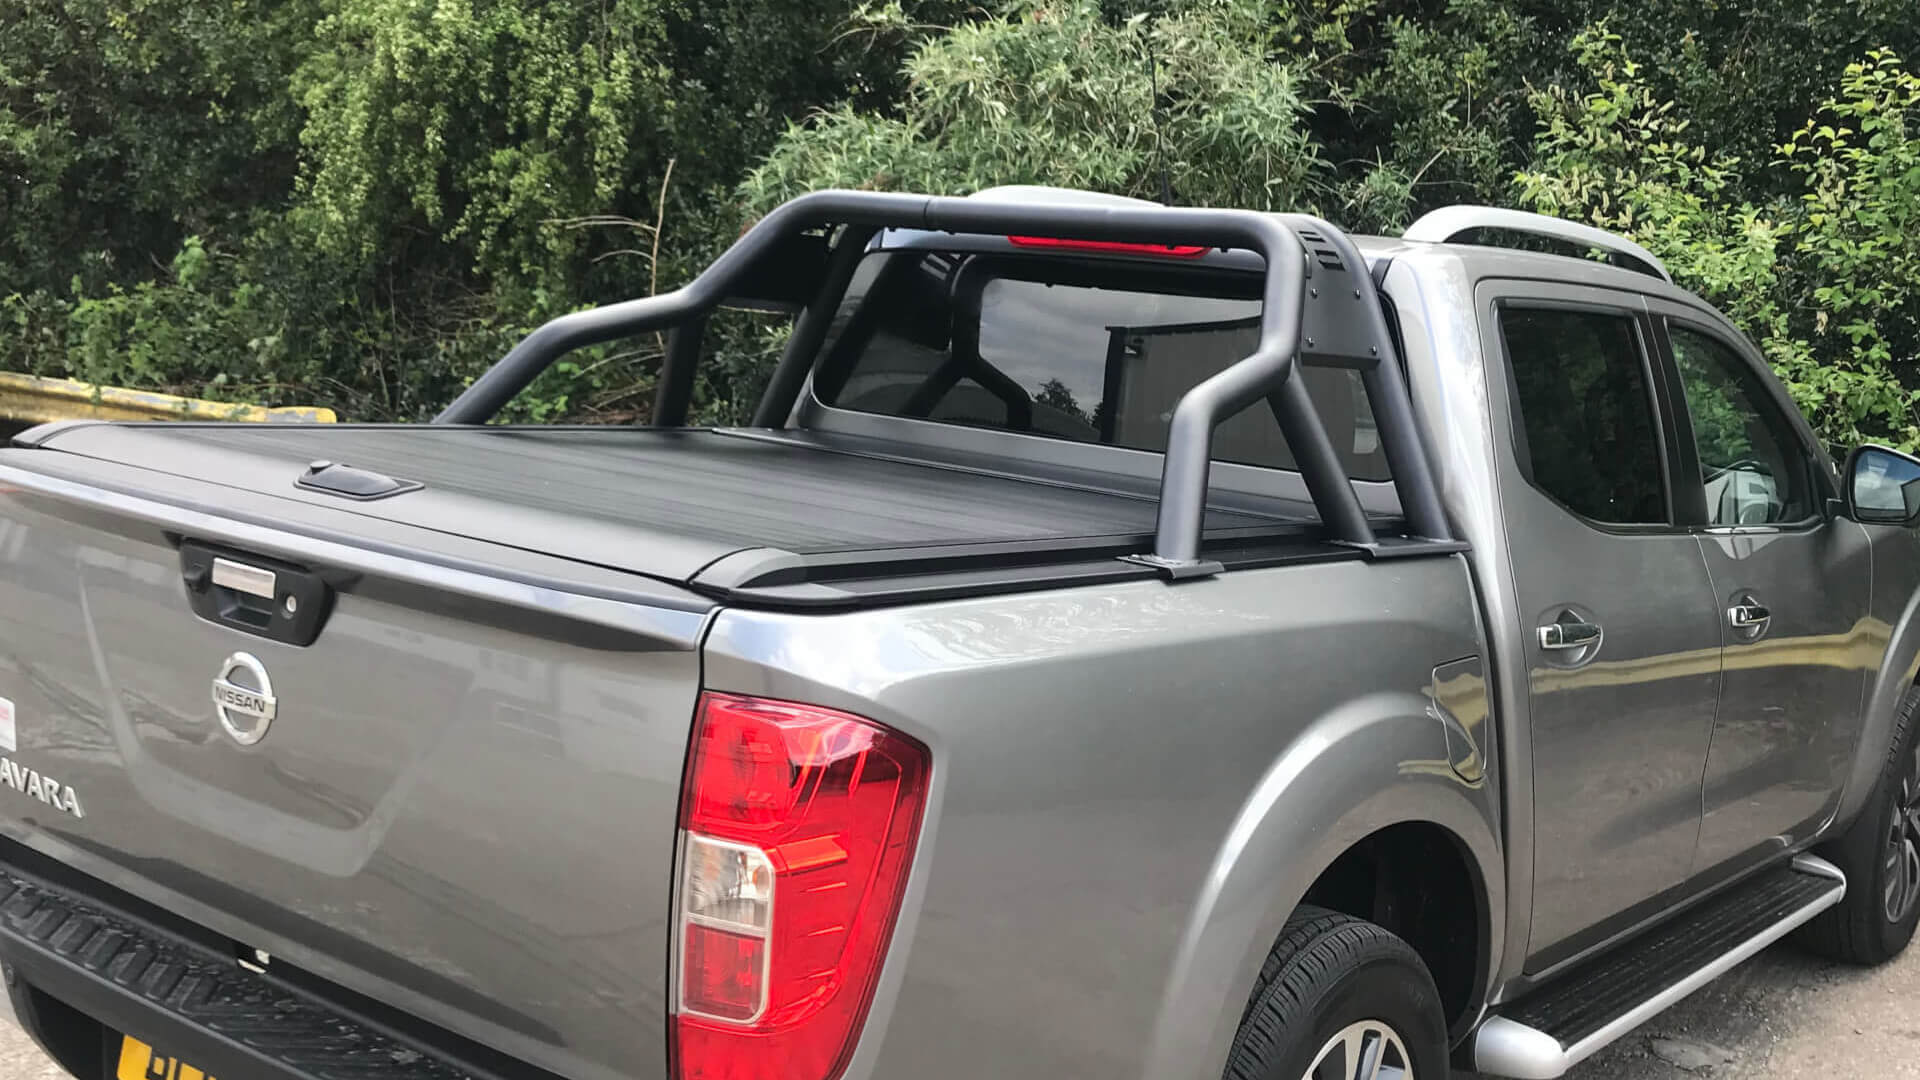 Direct4x4 expedition overland roll sports bars for multiple popular pickup trucks.